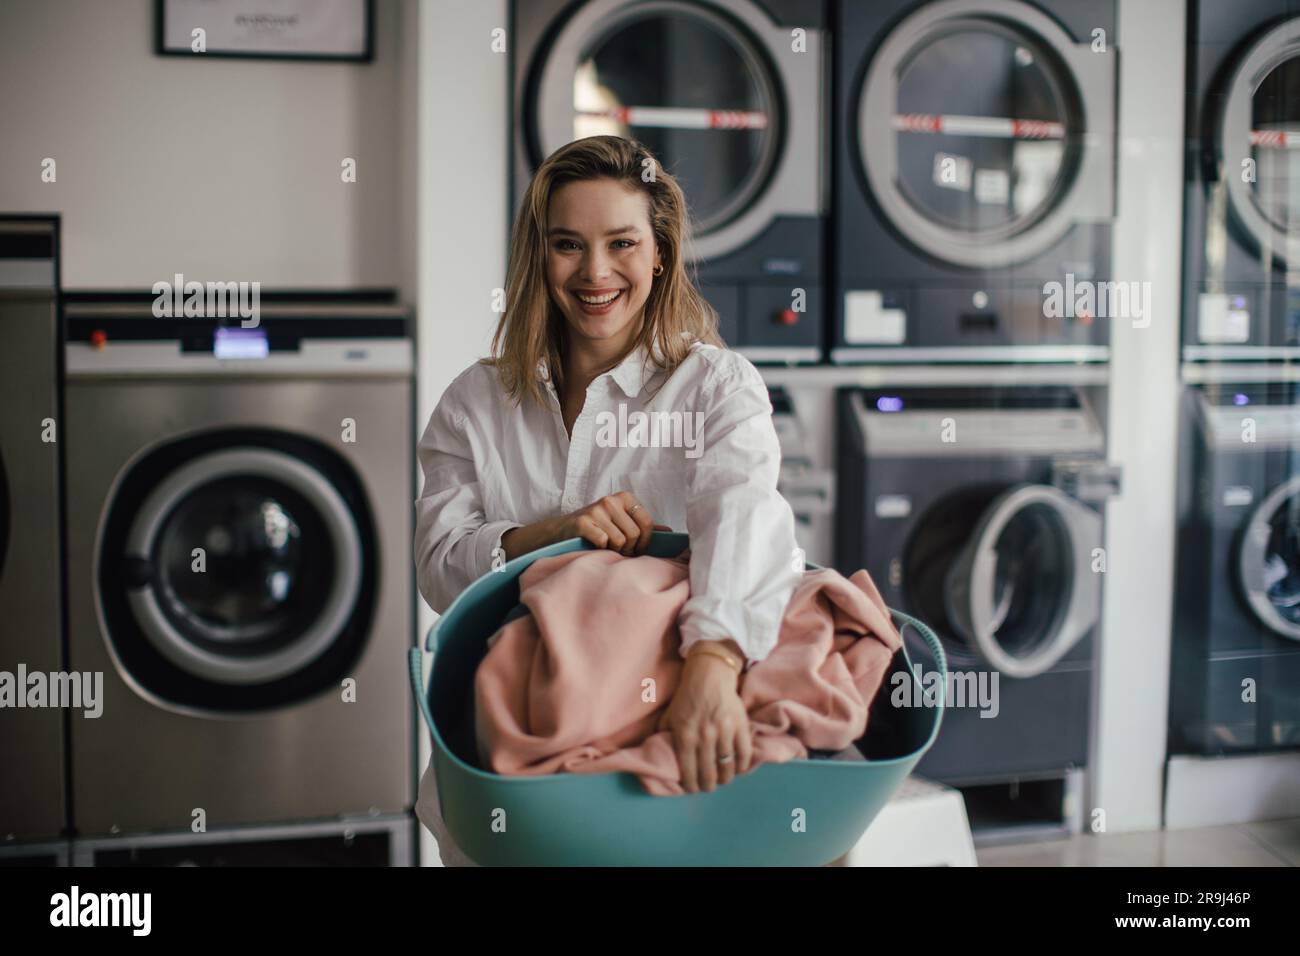 Young woman posing in a laundry room. Stock Photo